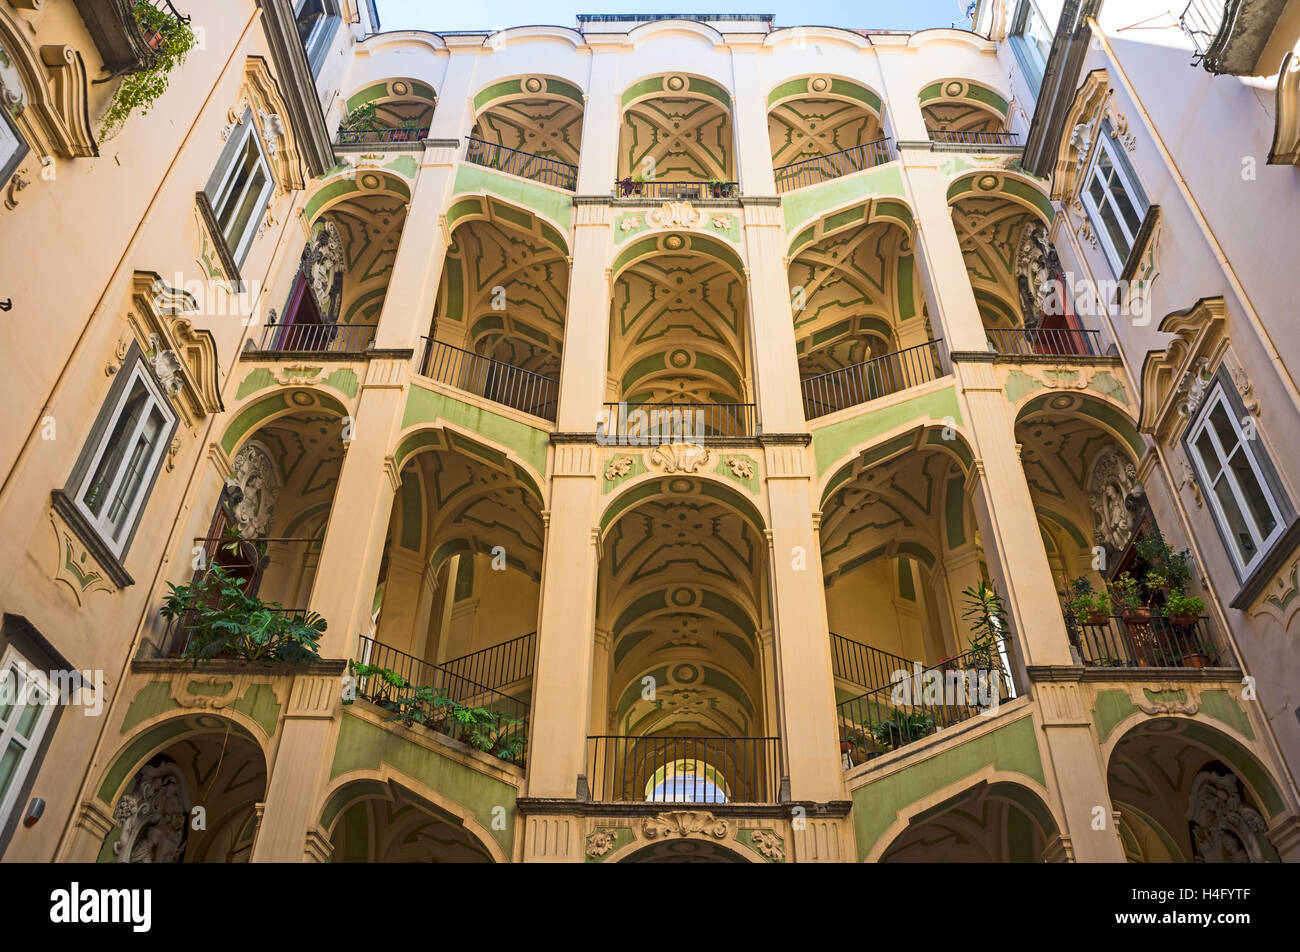 Palazzo dello Spagnuolo, Naples, Italy is a Baroque palace in Rione Sanita. Famous for its elaborate staircase. Stock Photo